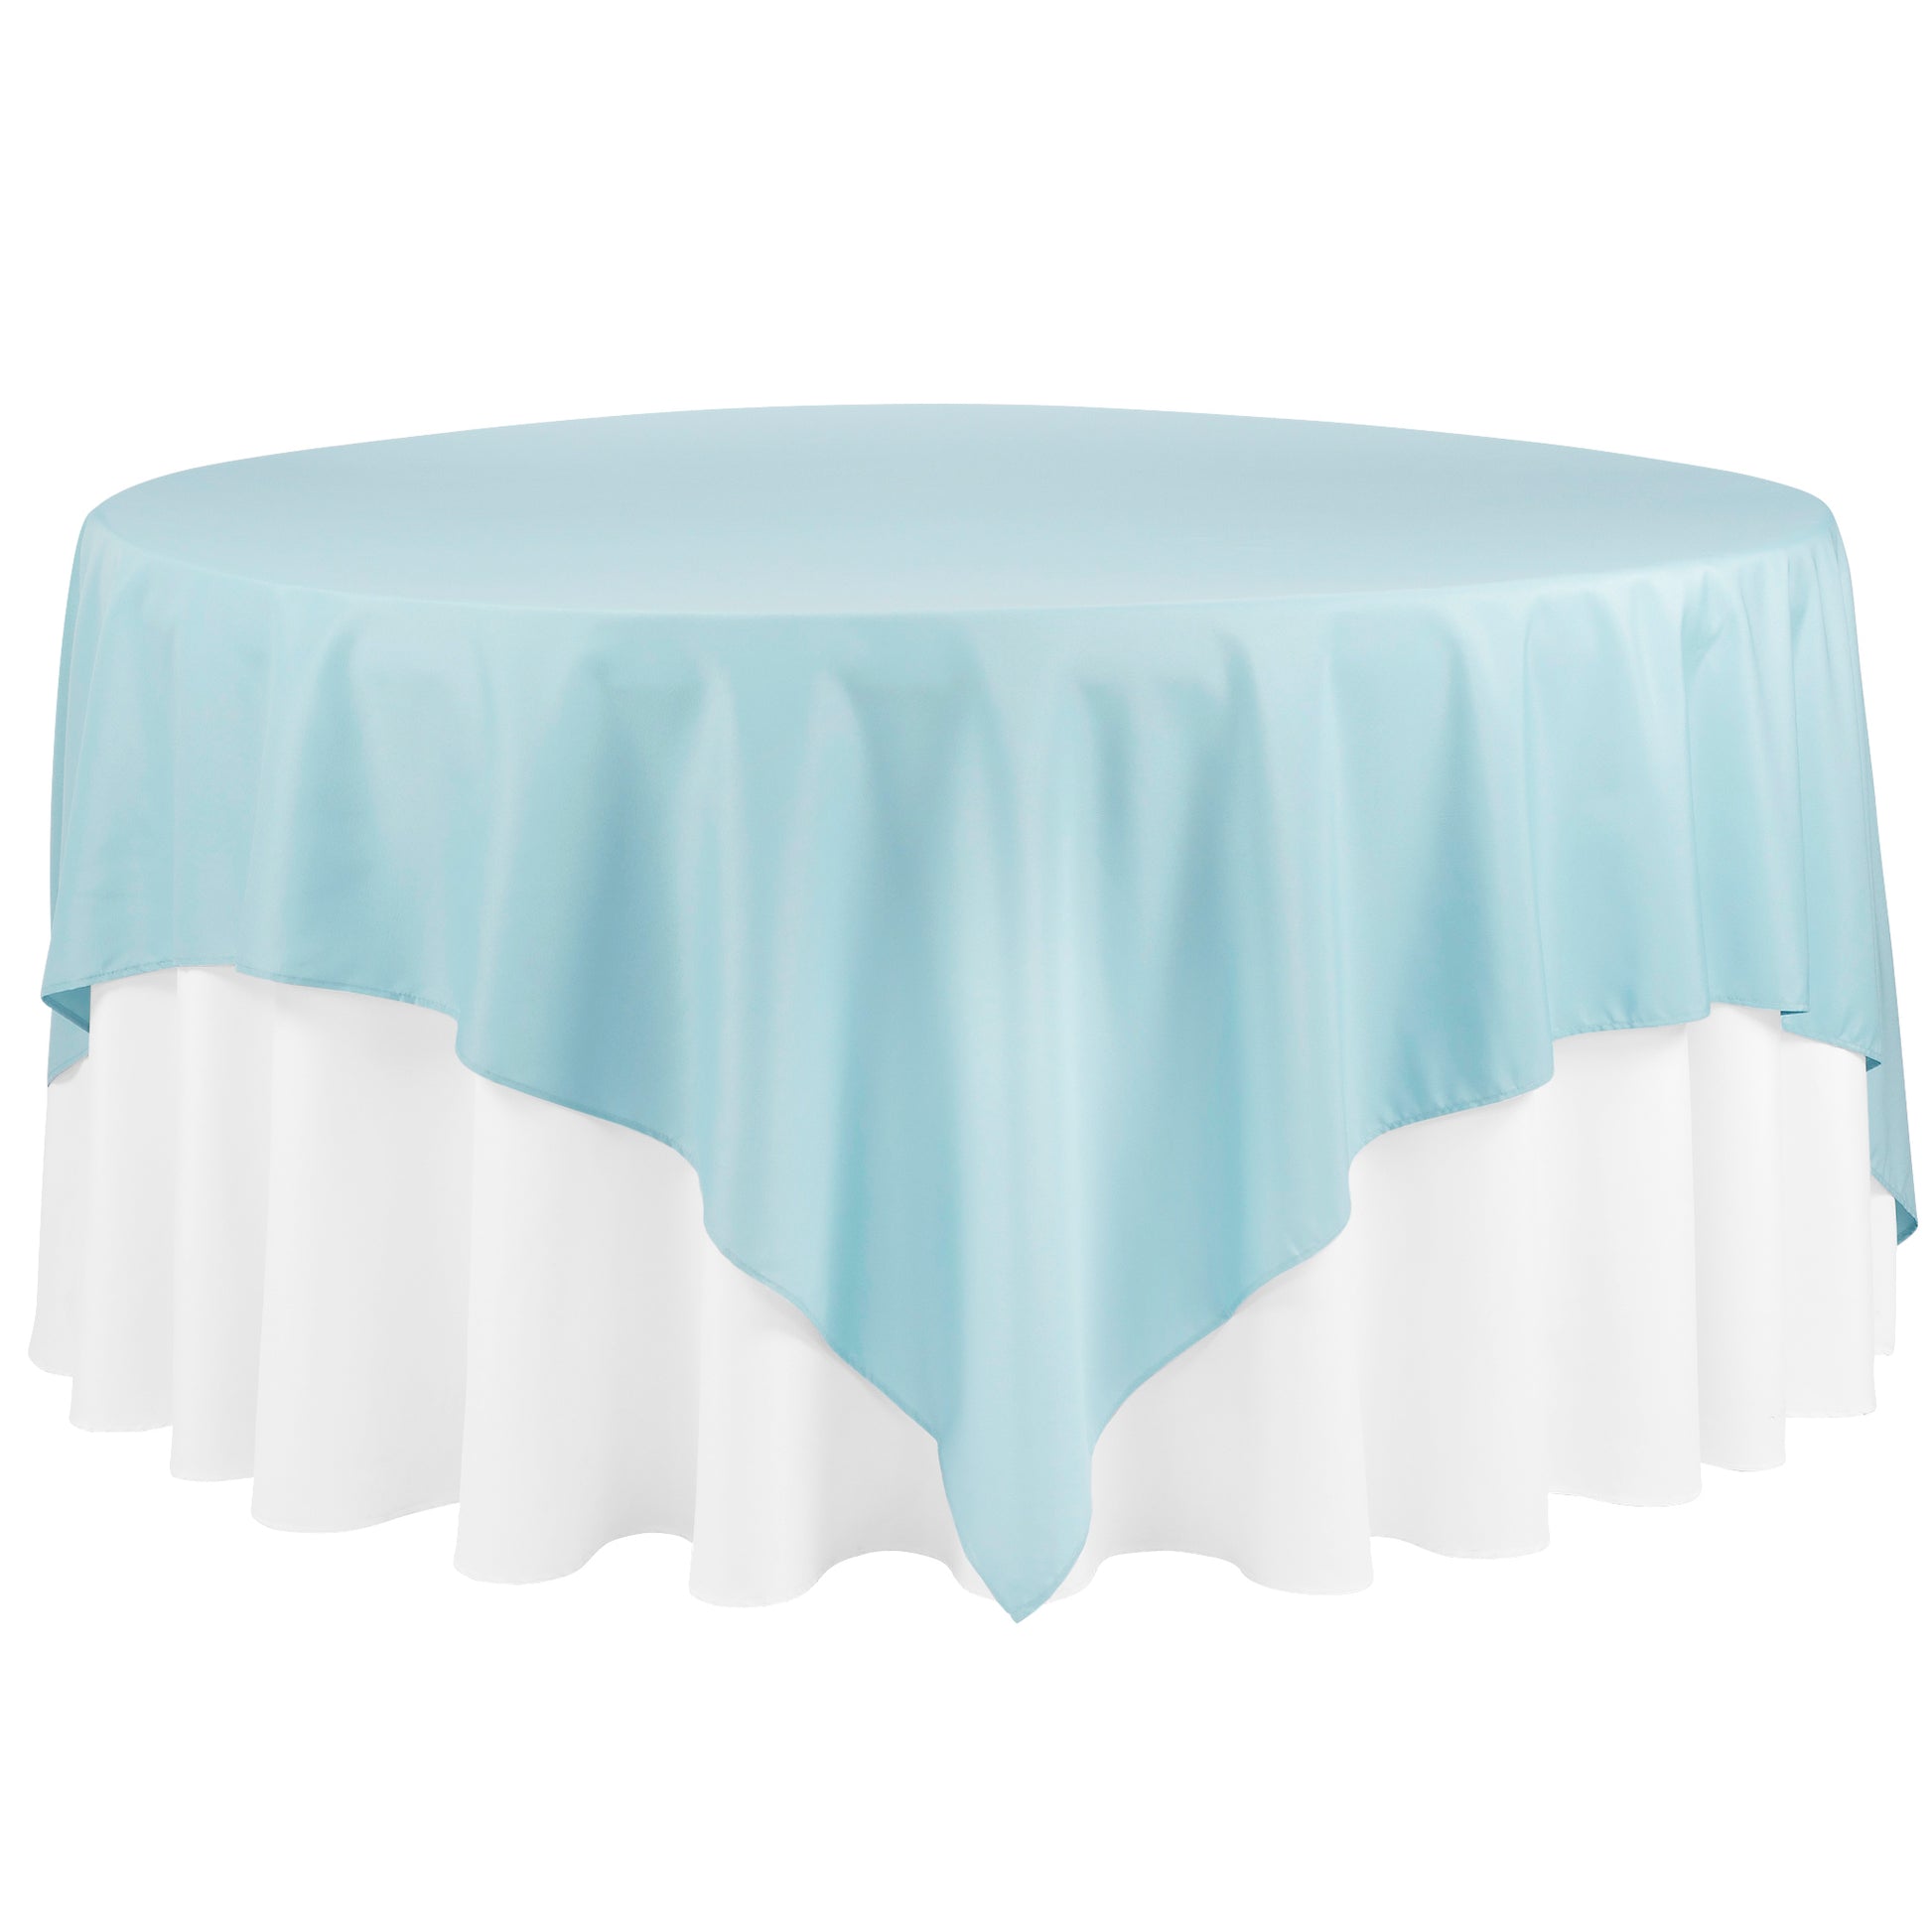 Economy Polyester Table Overlay Topper/Tablecloth 90"x90" Square - Baby Blue - CV Linens